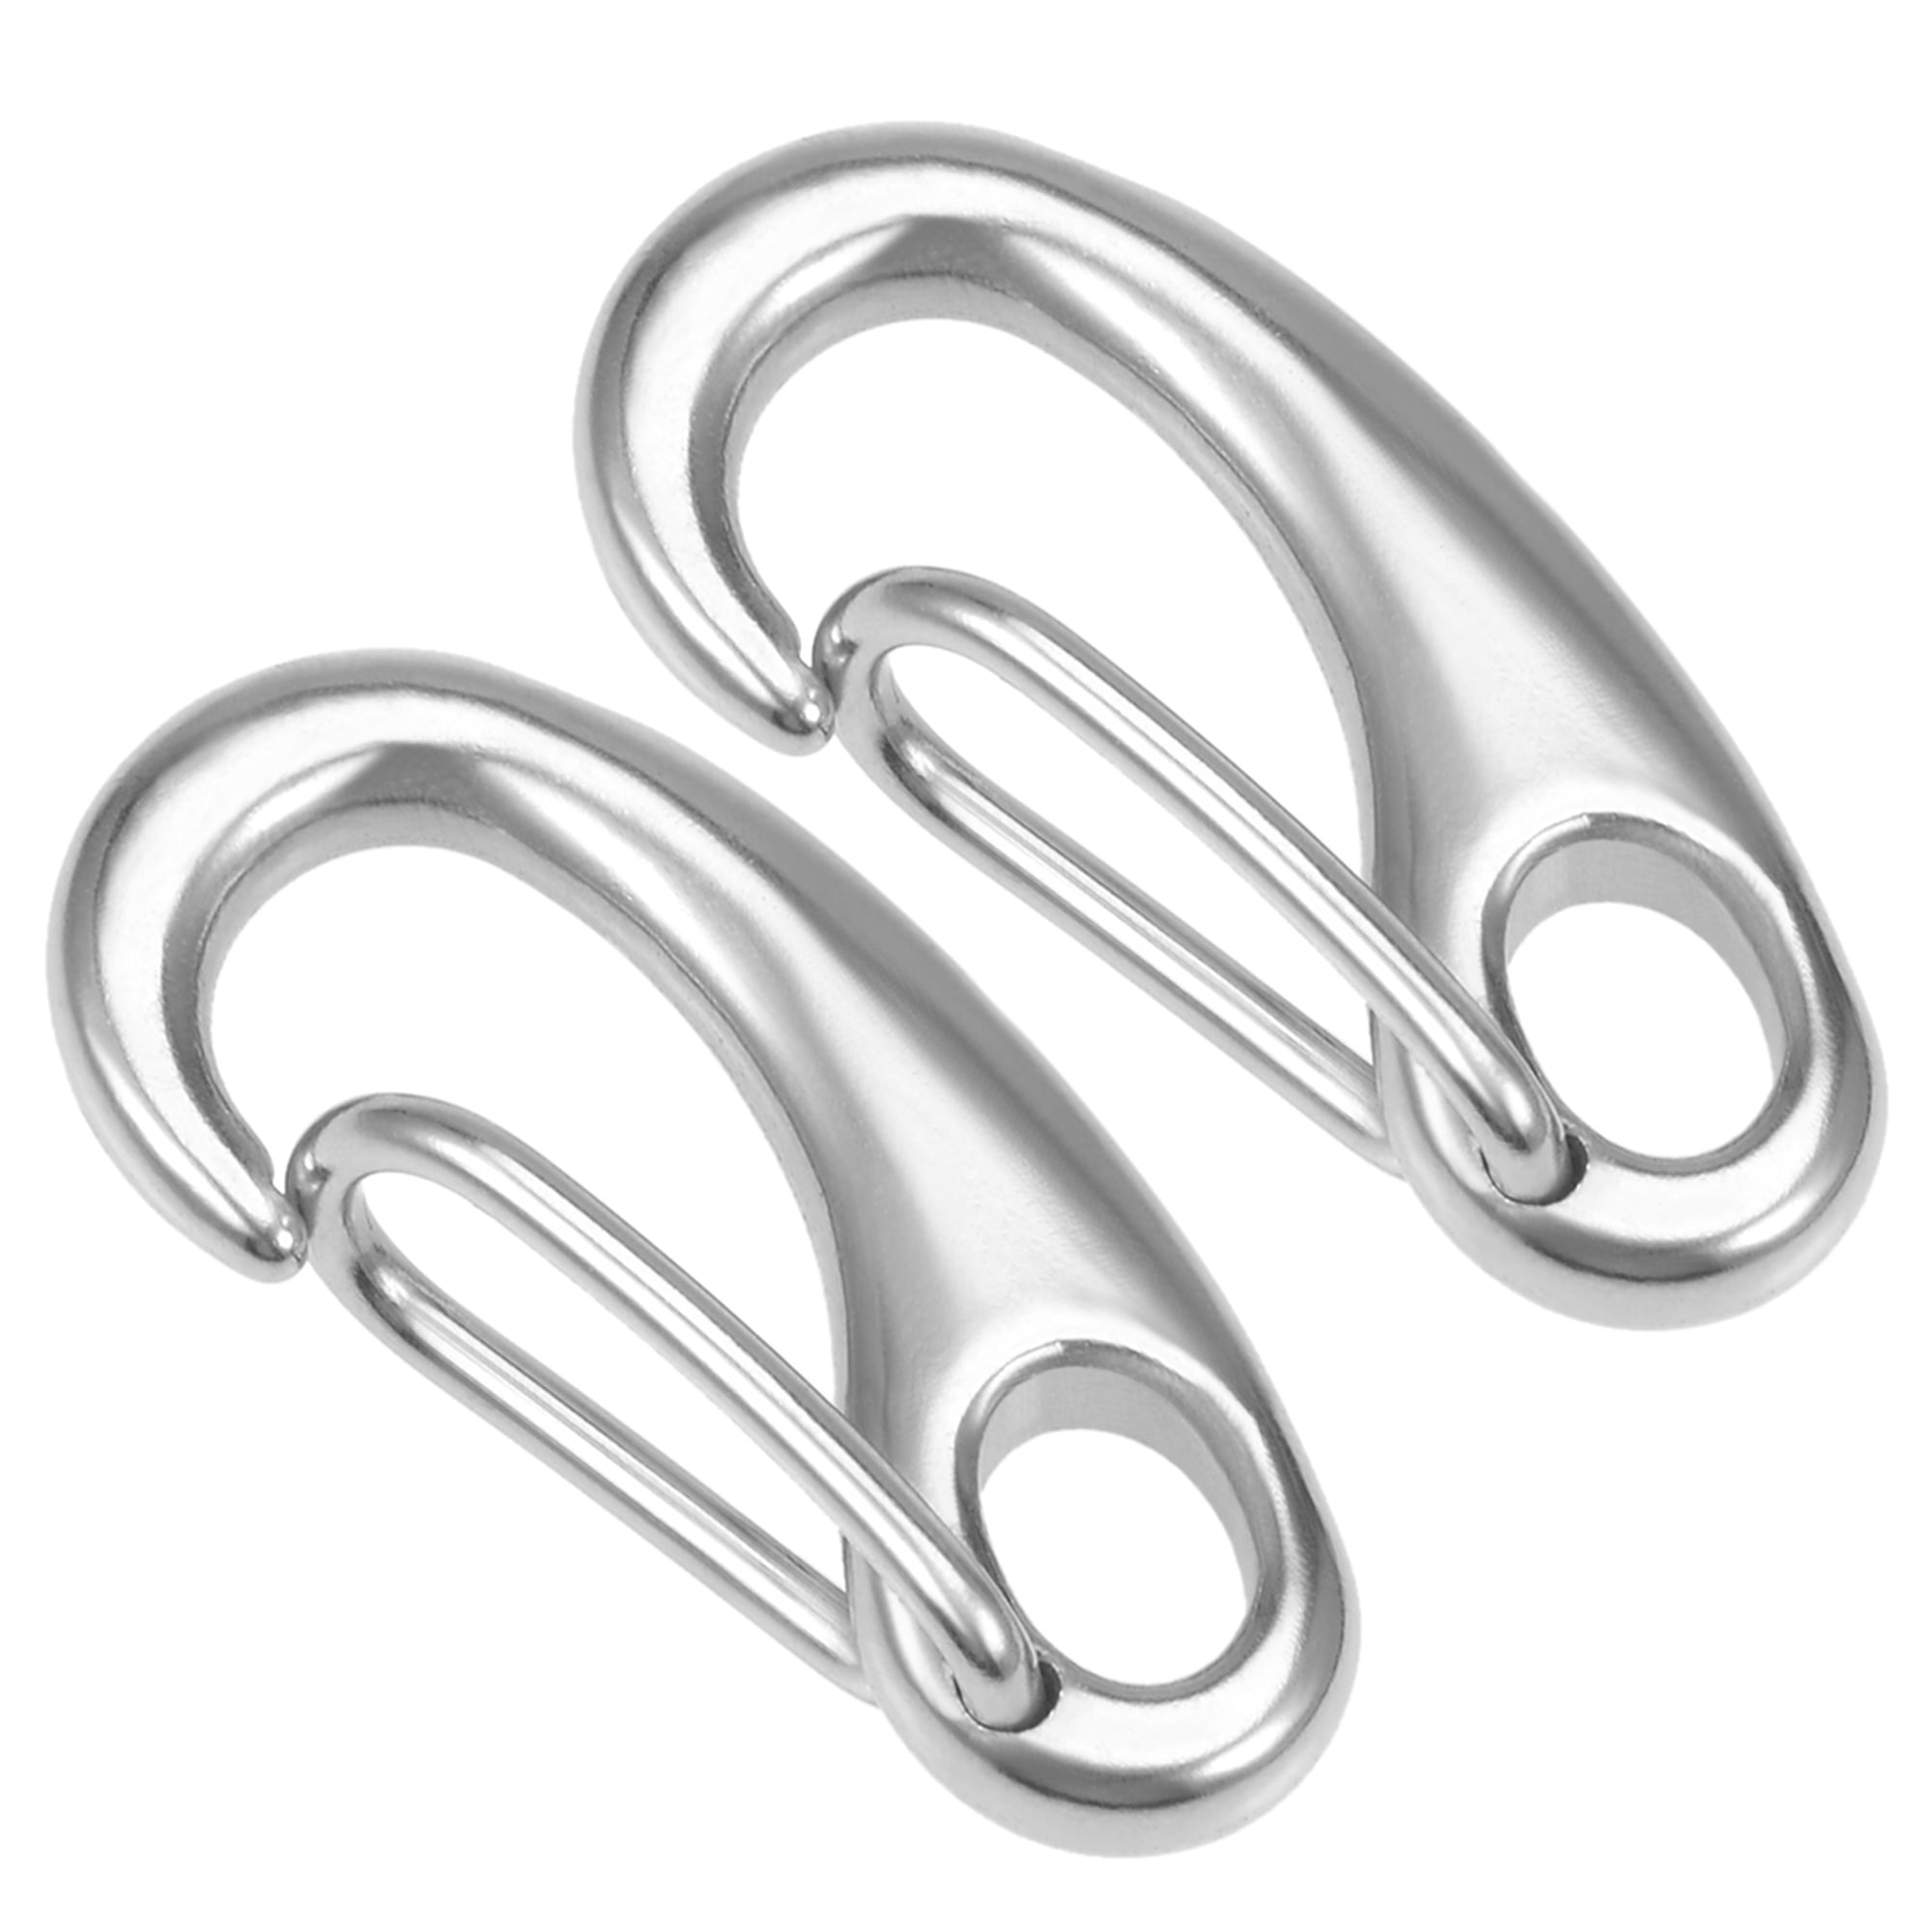 CNBTR Silver 304 Stainless Steel Grade Heavy Duty Spring Snap Hook Pack of 5 M5 x 50mm 